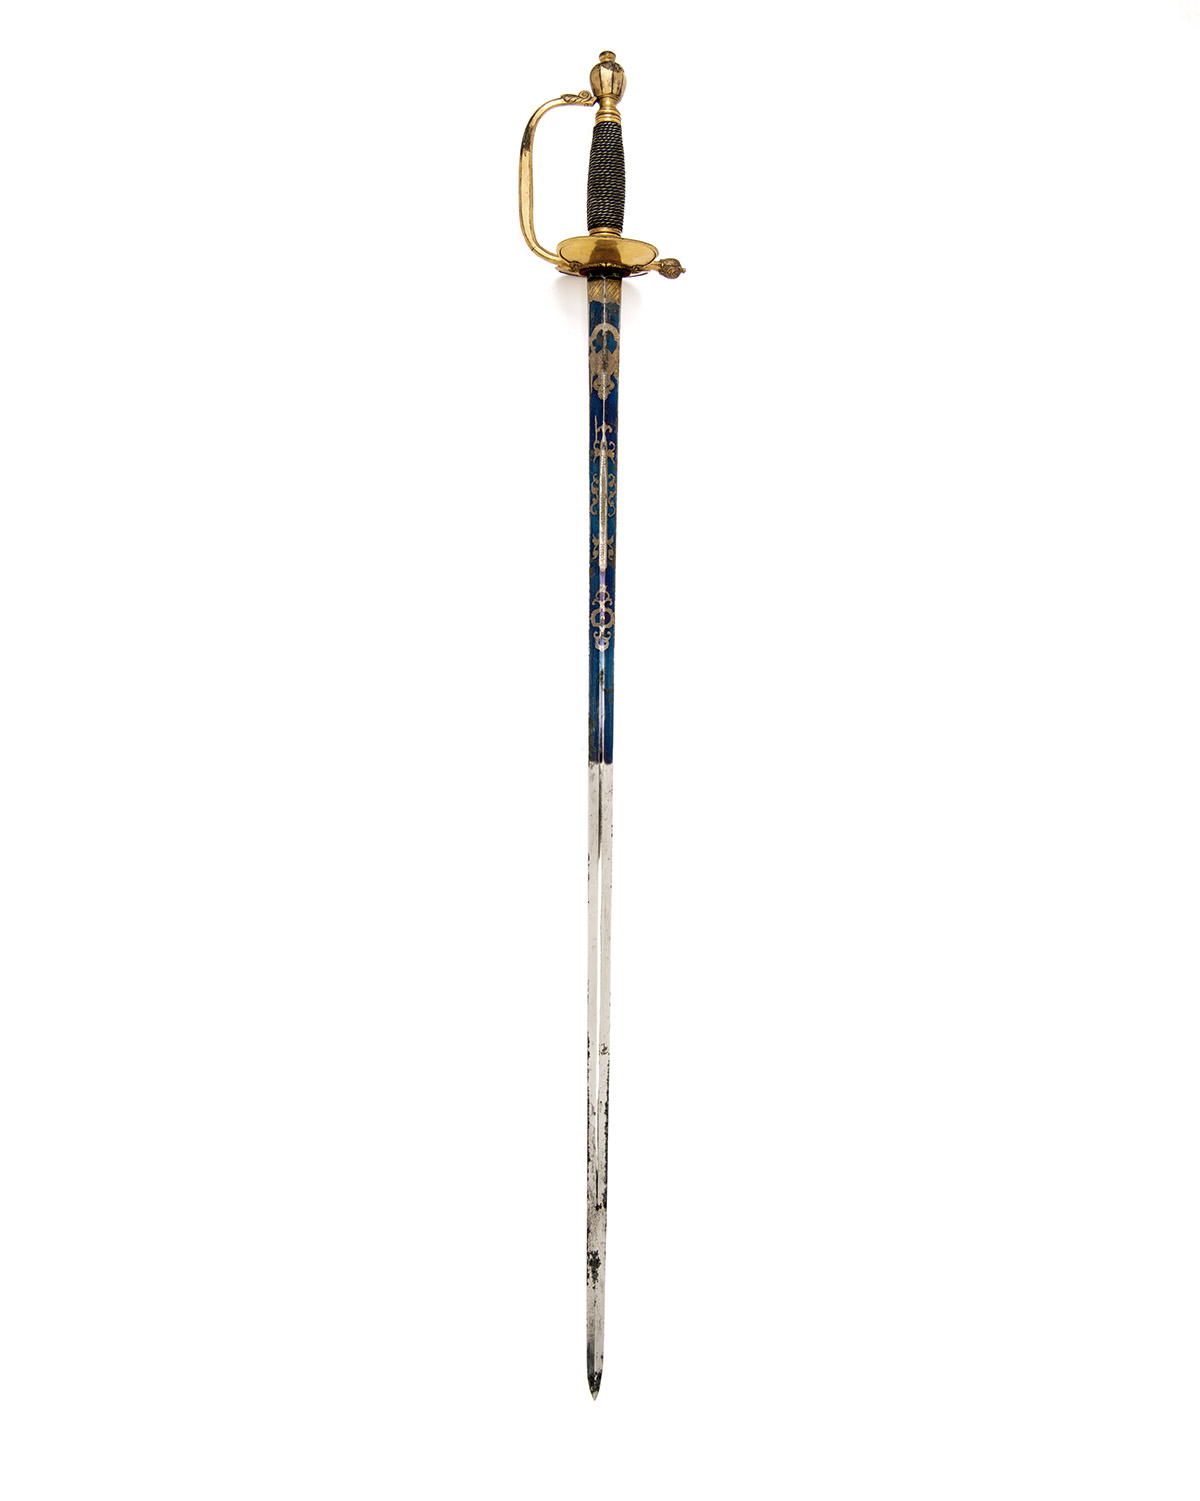 TATHAM, LONDON A FINE BRITISH INFANTRY 1786 PATTERN OFFICER'S SWORD WITH BLUE AND GILT BLADE, - Image 2 of 7